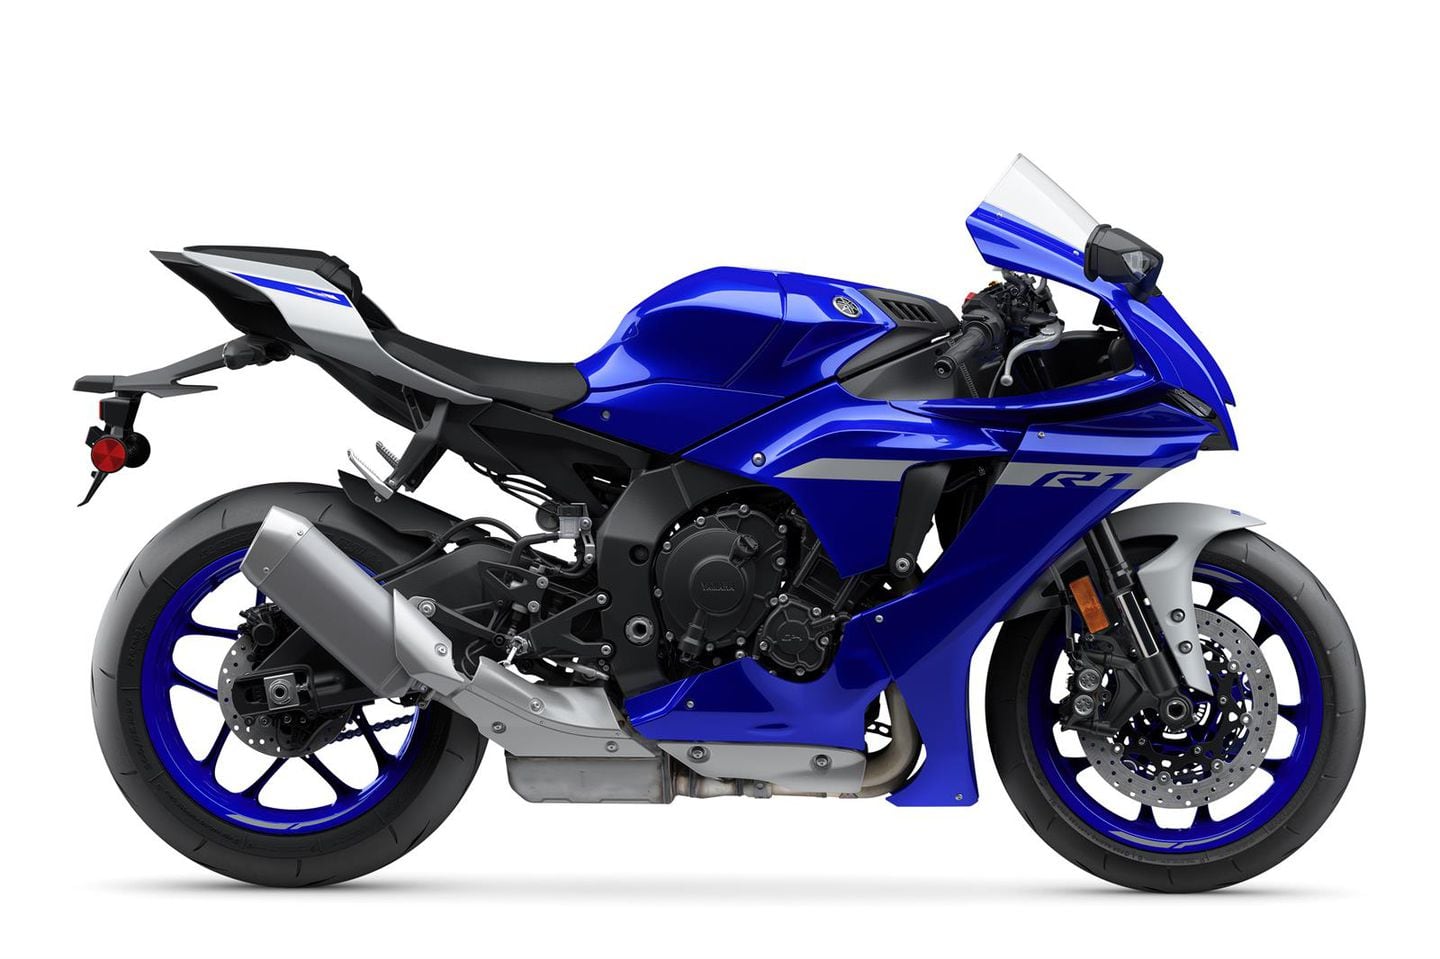 2020 Yamaha YZF-R1 Buyer's Guide: Photos, Price | Cycle World